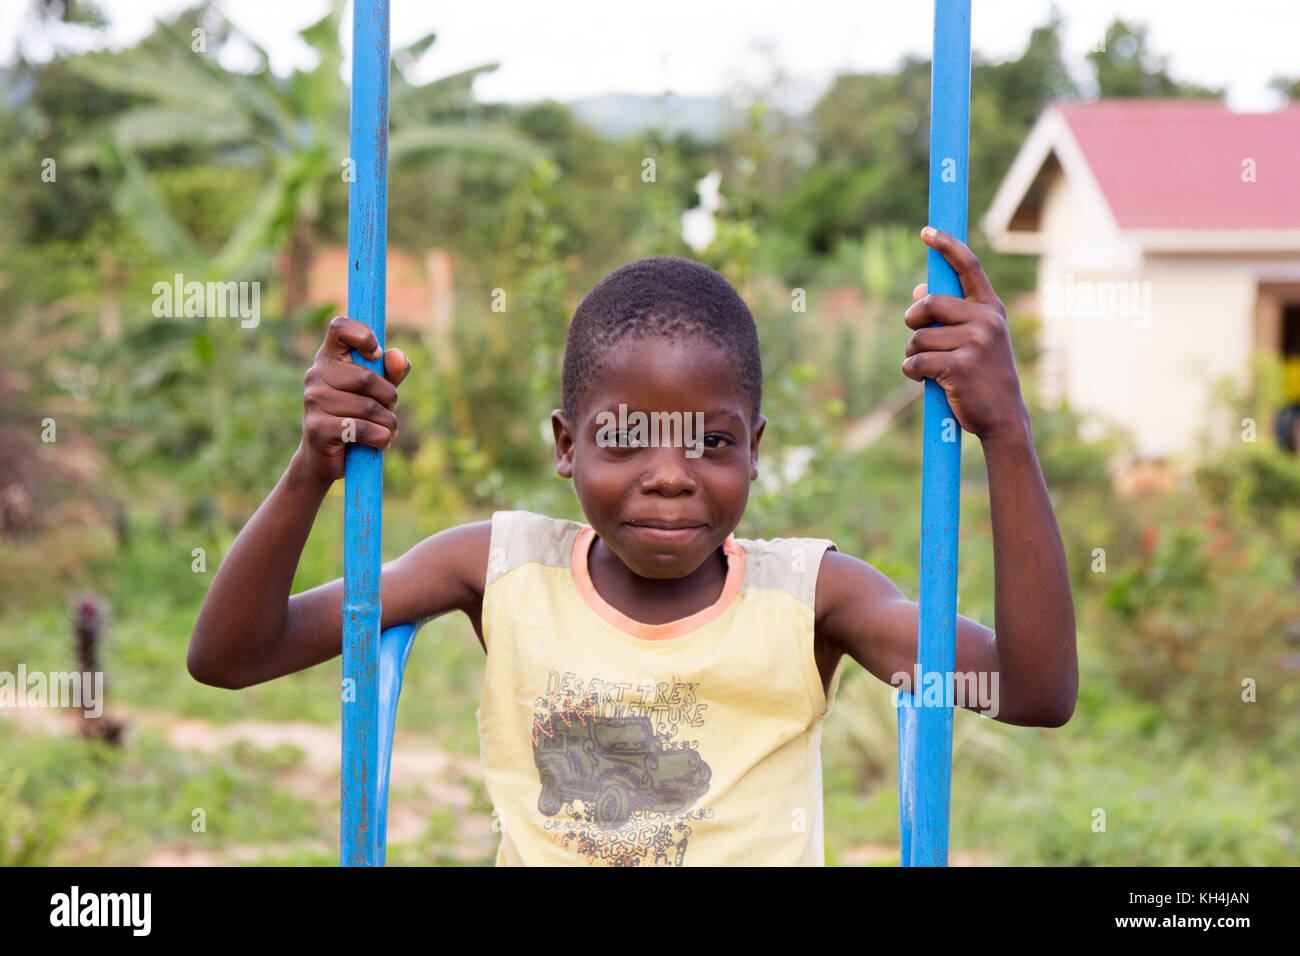 A smiling 13-year old Ugandan boy swinging on a colorful swing Stock Photo